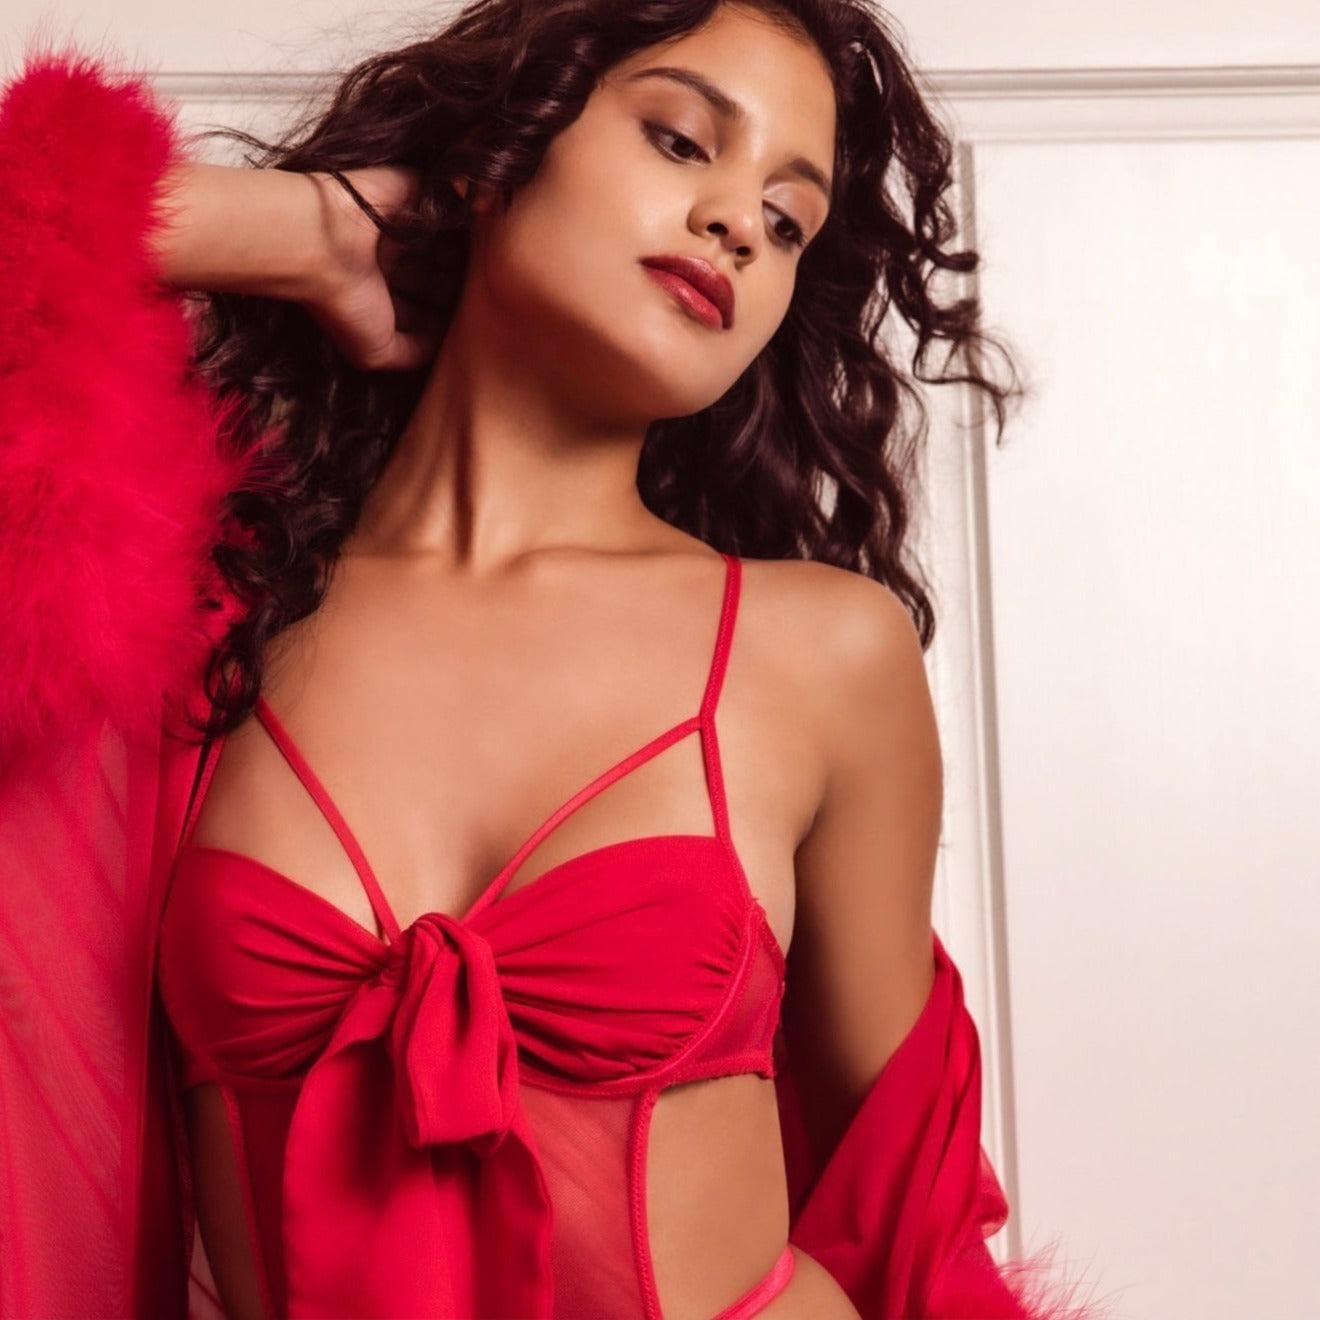 Jonquil Heidi Feather Wrap in Bright Red HED030-Robes-Jonquil in Bloom-Bright Red-XSmall/Small-Anna Bella Fine Lingerie, Reveal Your Most Gorgeous Self!